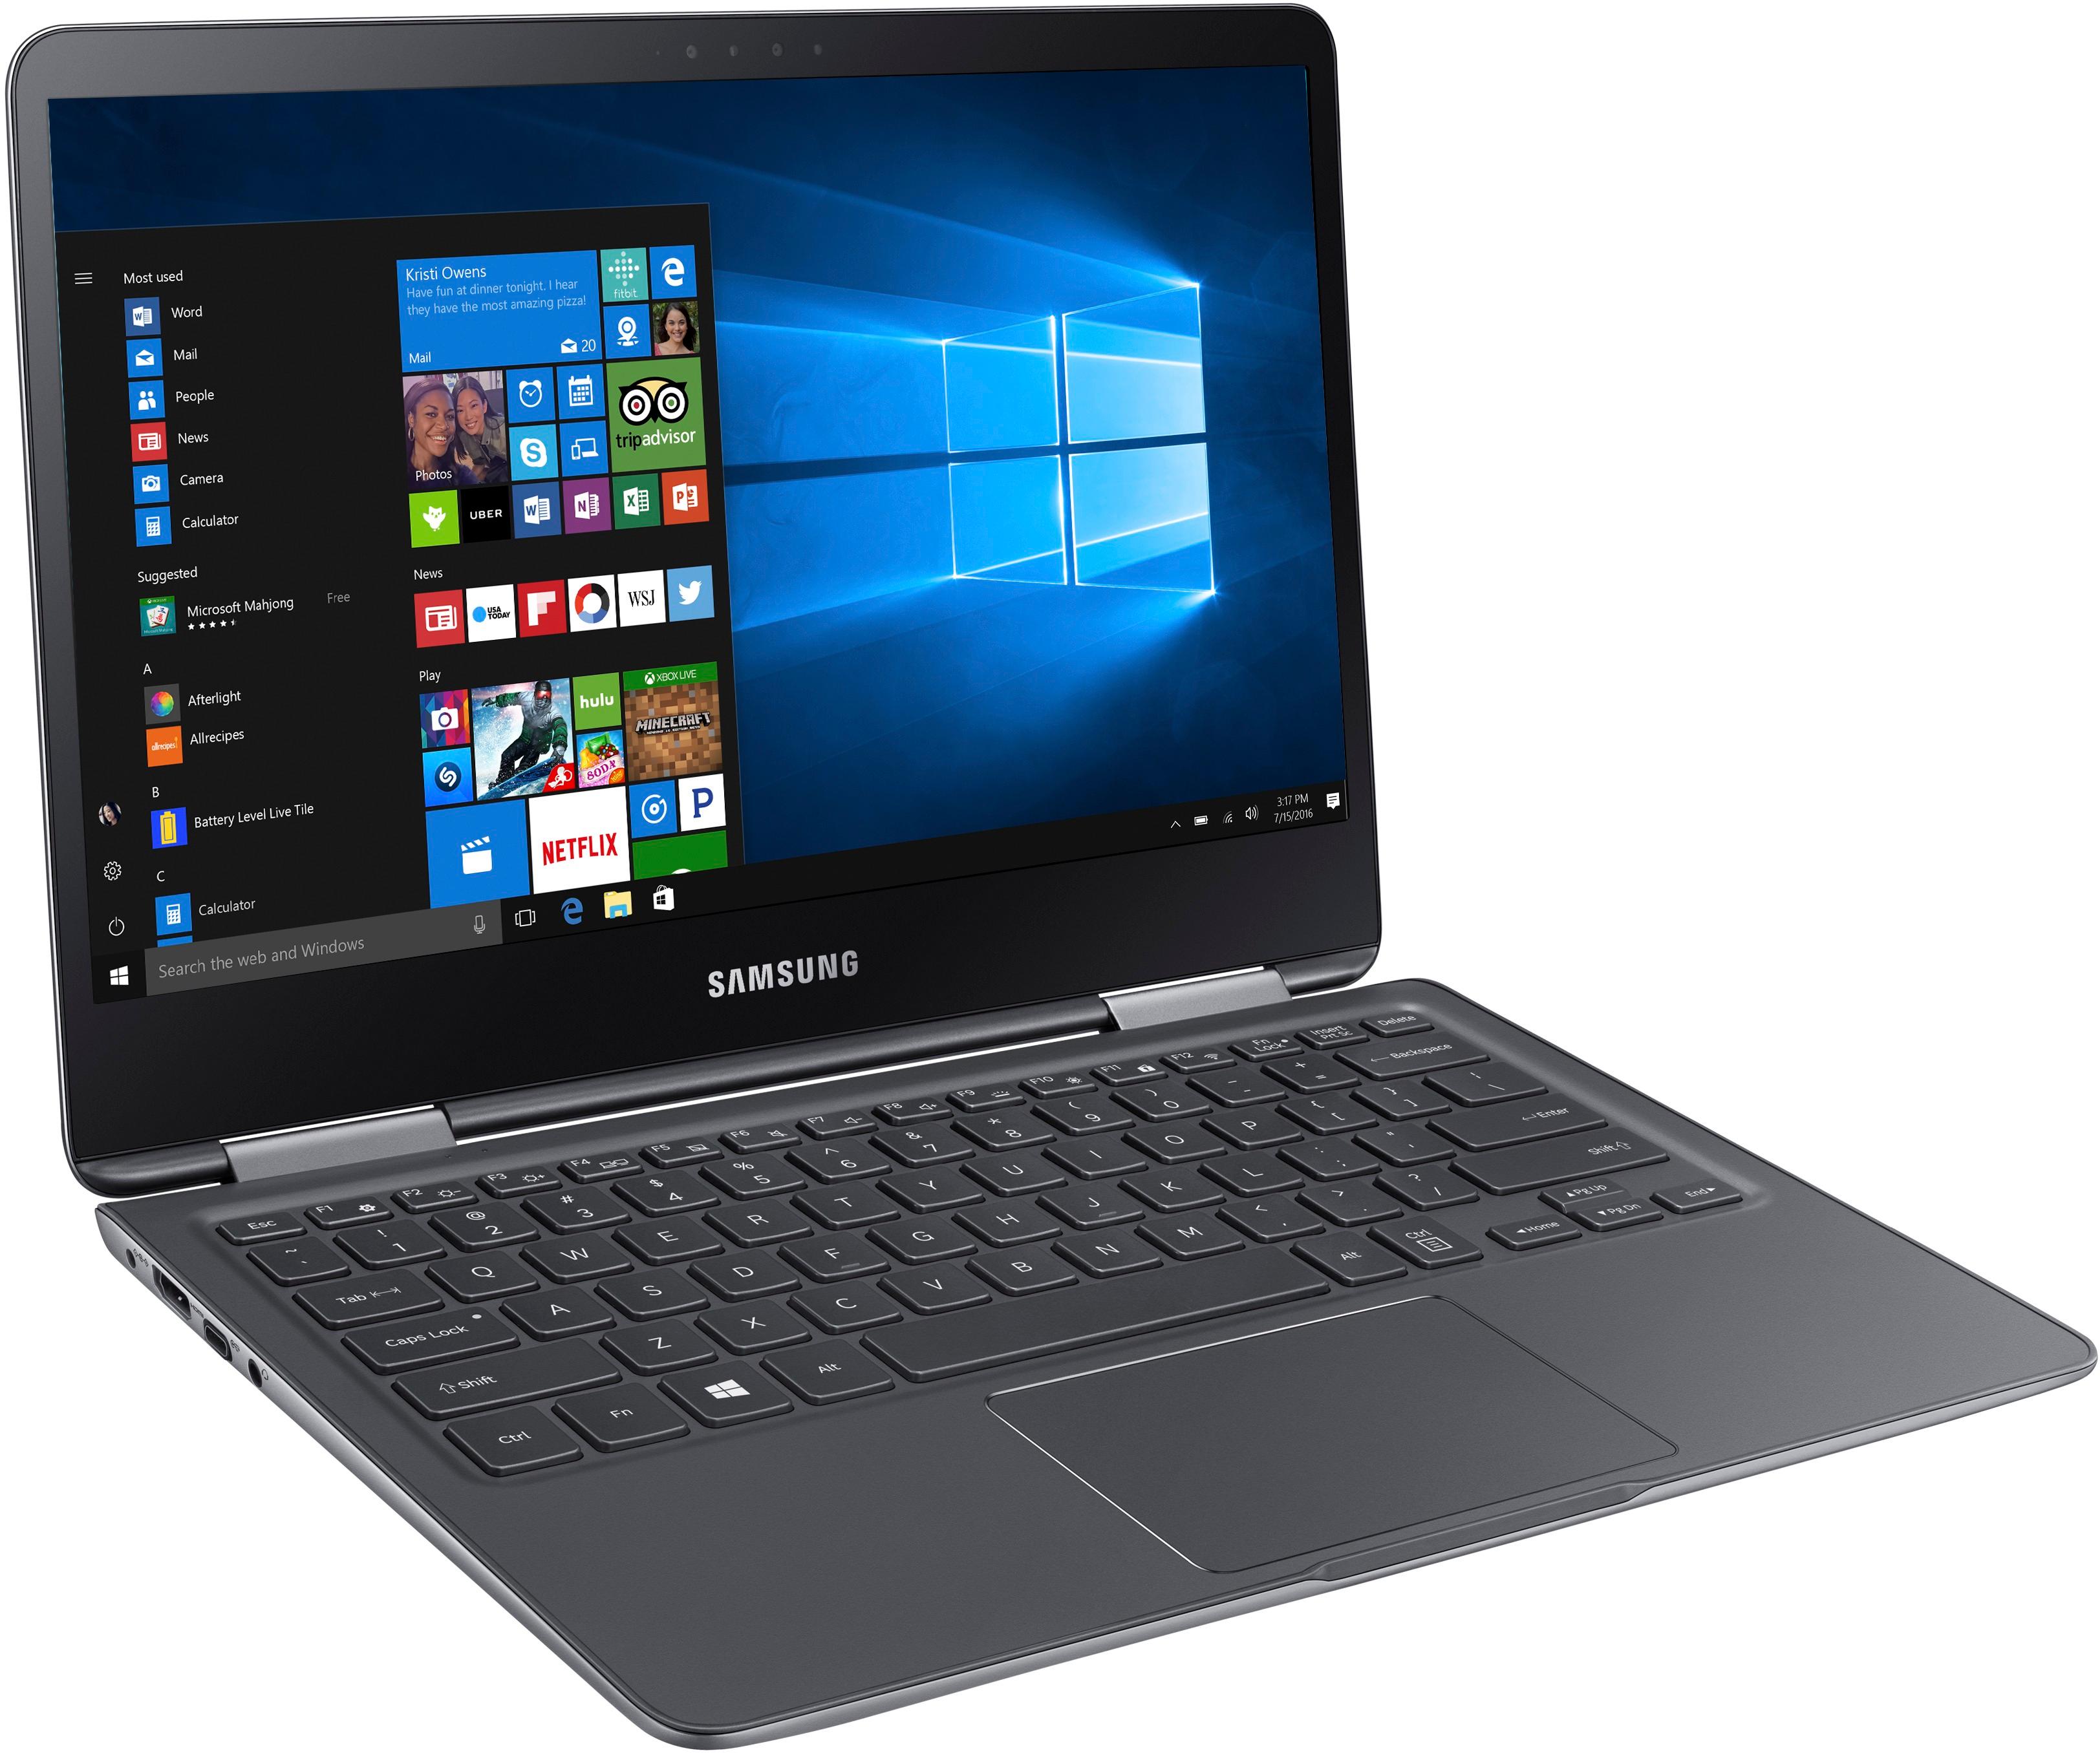 Questions and Answers: Samsung Notebook 9 Pro 13.3